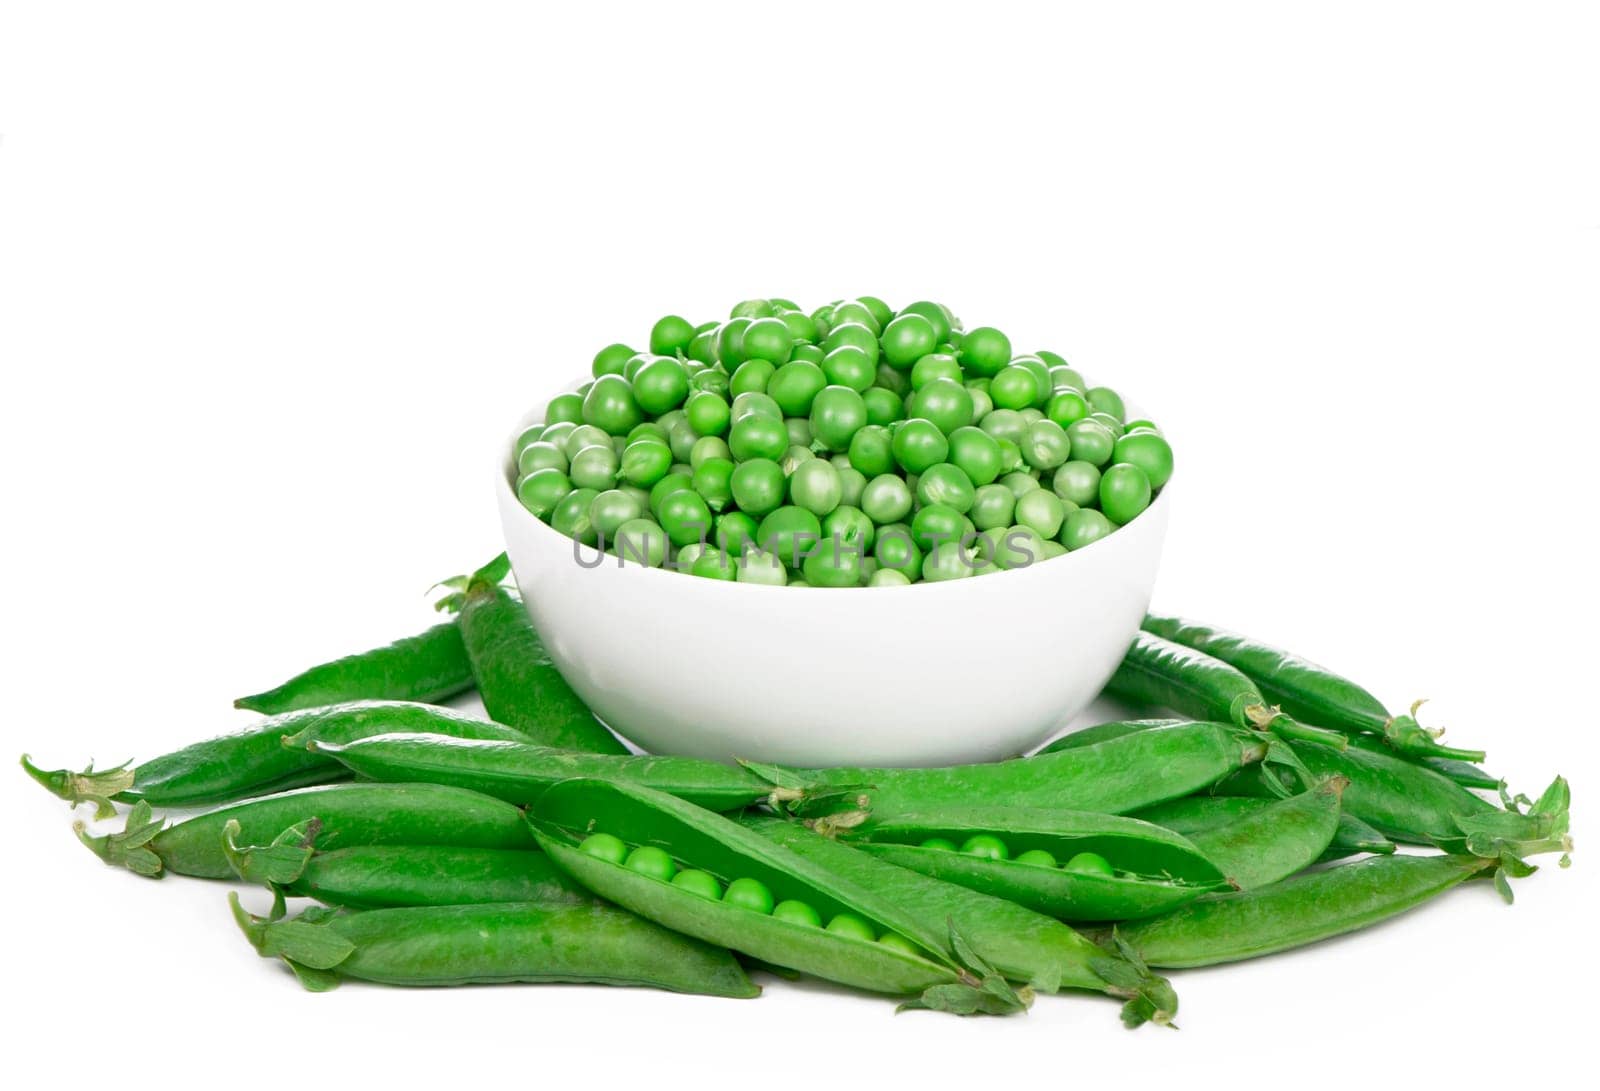 Bowl with green peas the isolated. Raw green peas in pods isolated on the white background by aprilphoto